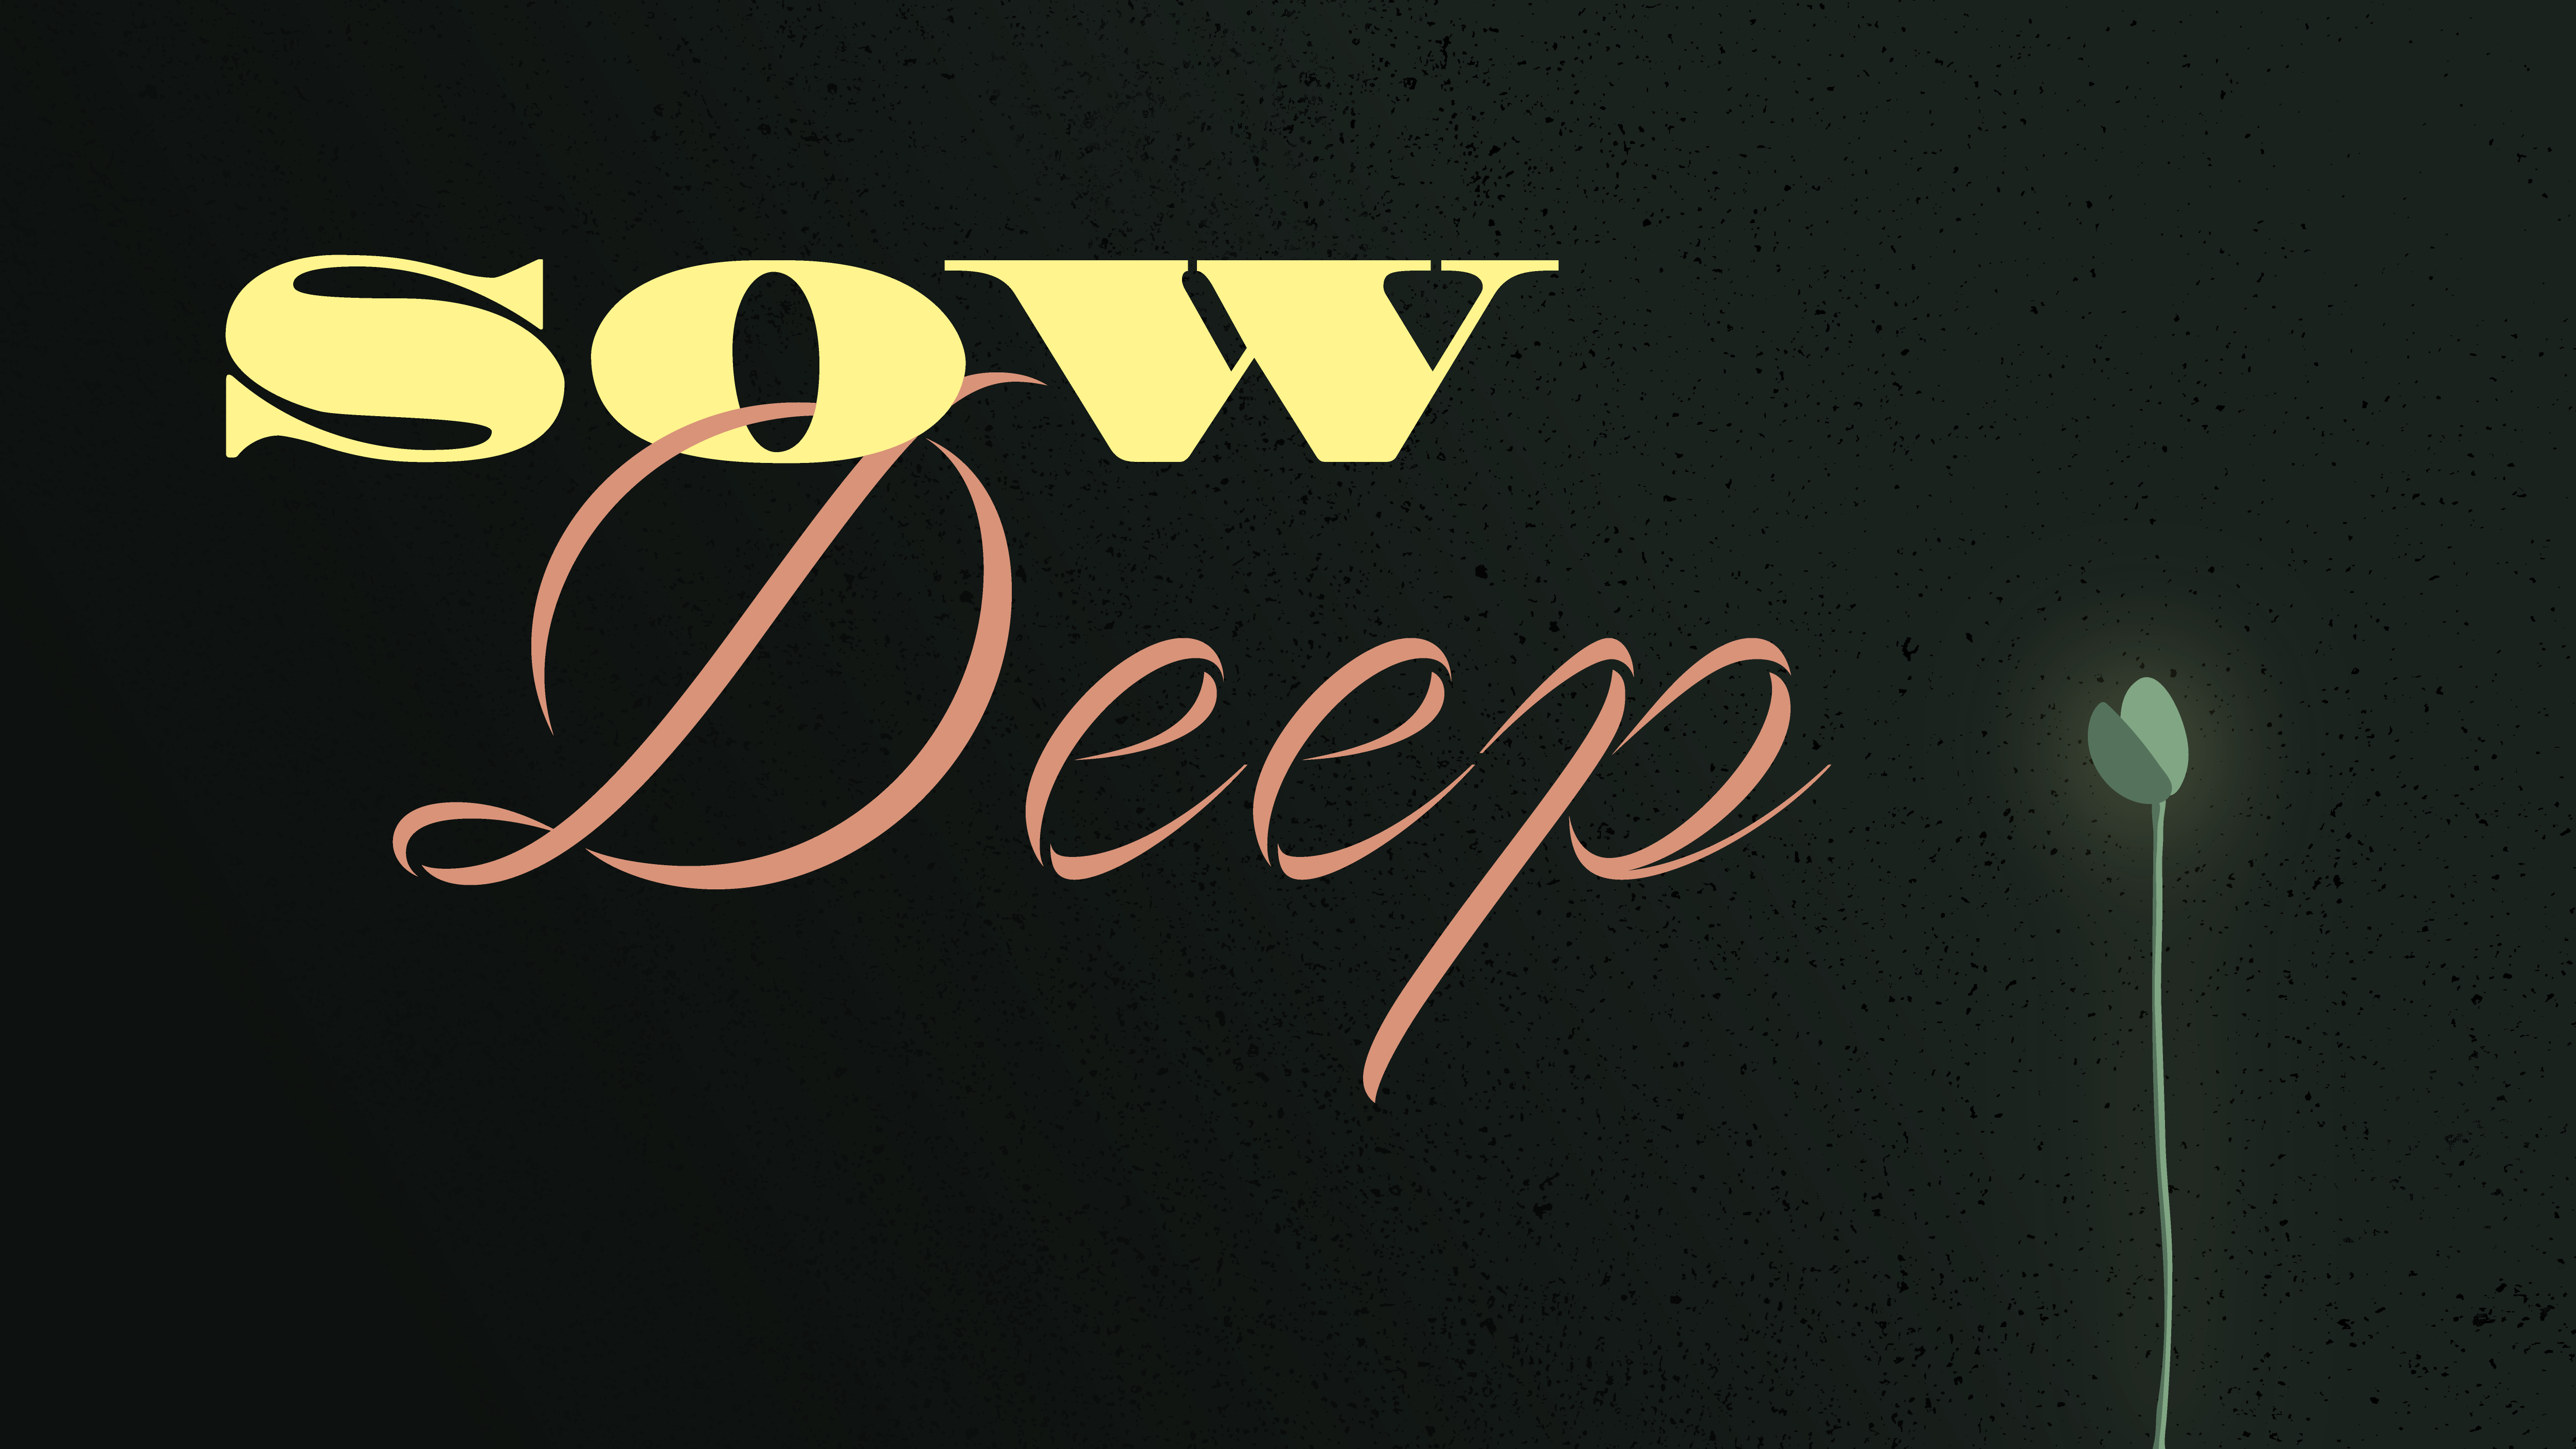 Traditional Service: “Sow Deep”